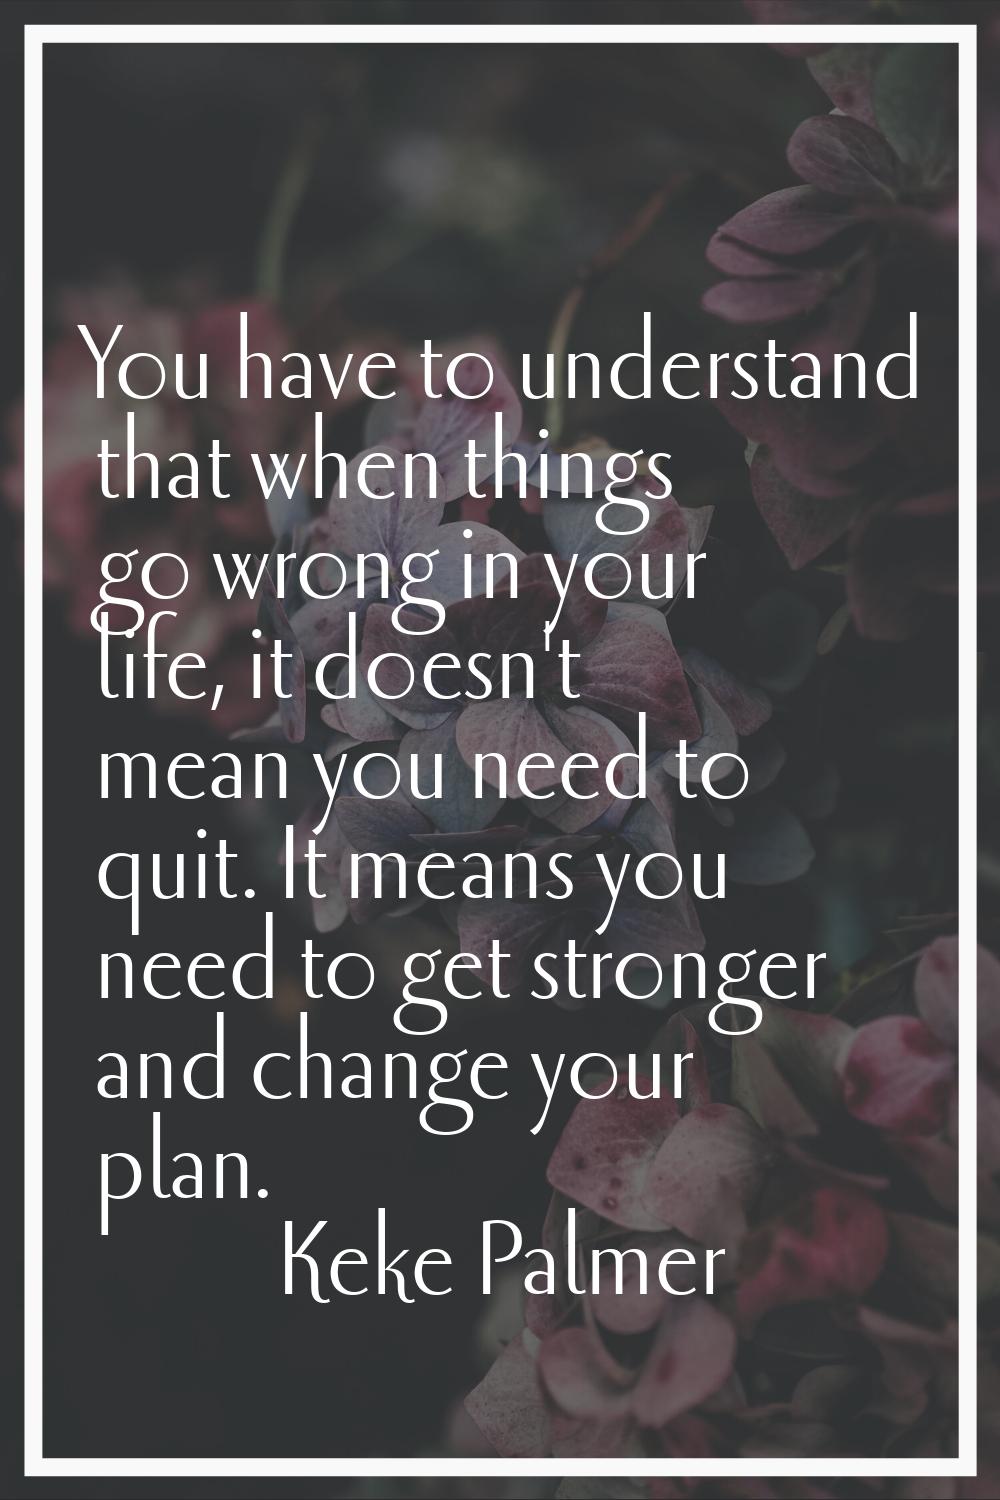 You have to understand that when things go wrong in your life, it doesn't mean you need to quit. It